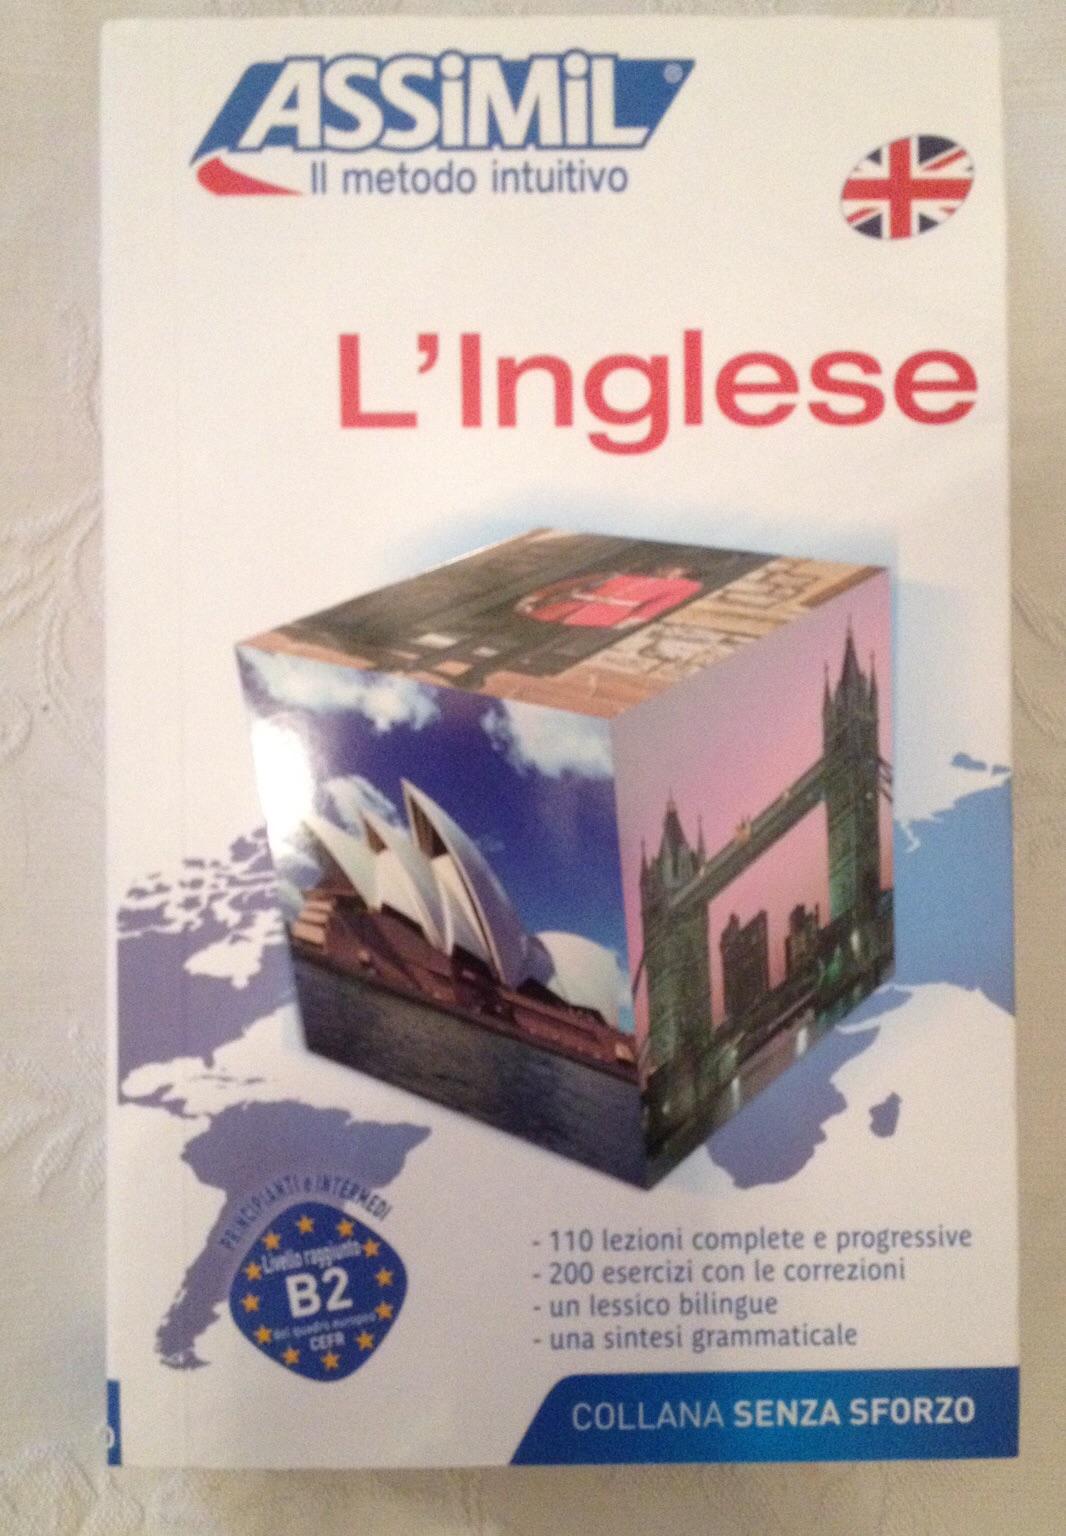 Libro Assimil inglese in 00154 Roma for €15.00 for sale